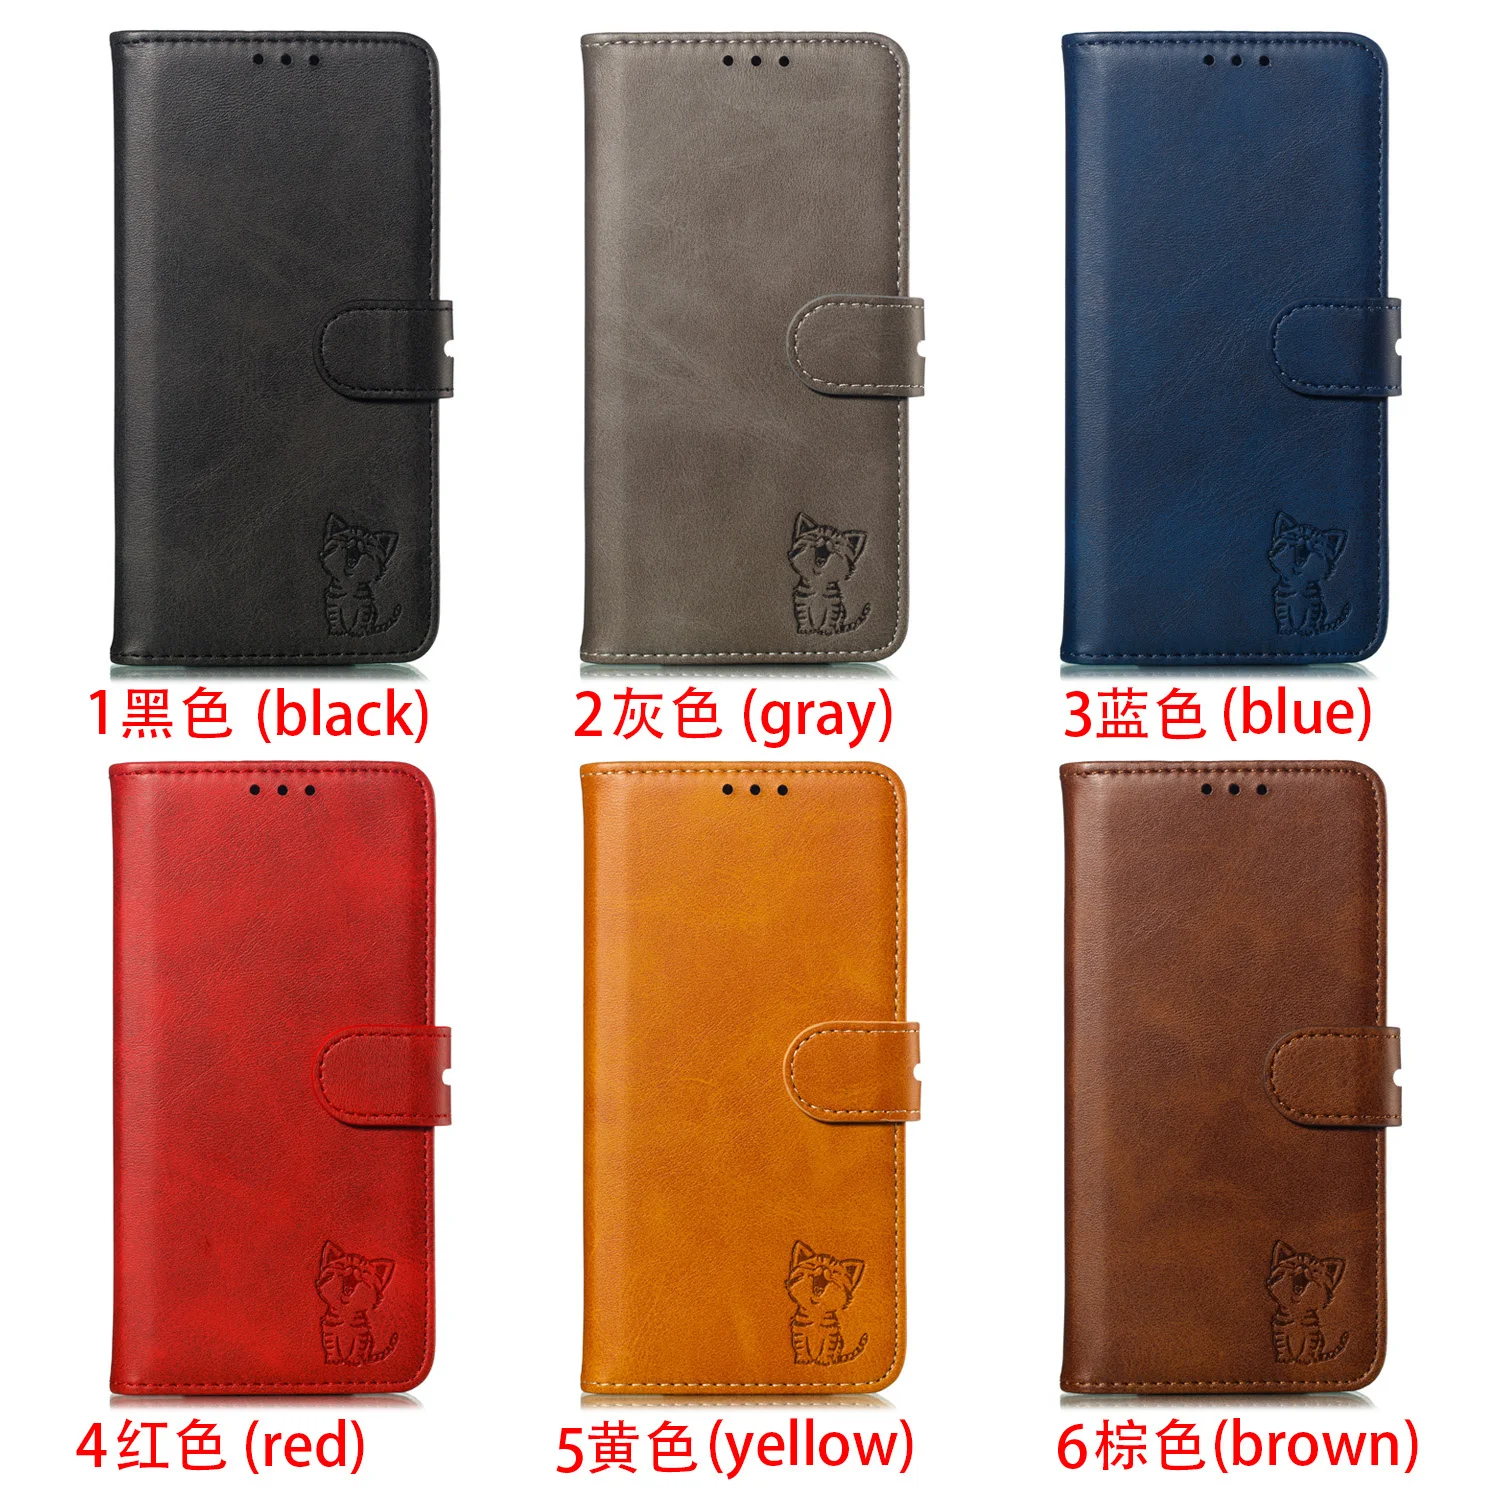 Happy Cat Solid Color Phone Case Cover For Samsung Galaxy A9s A6s A8s A6 J4 J6 Plus J8 A7 2018 A9 2019 A920 Leather Wallet Bags